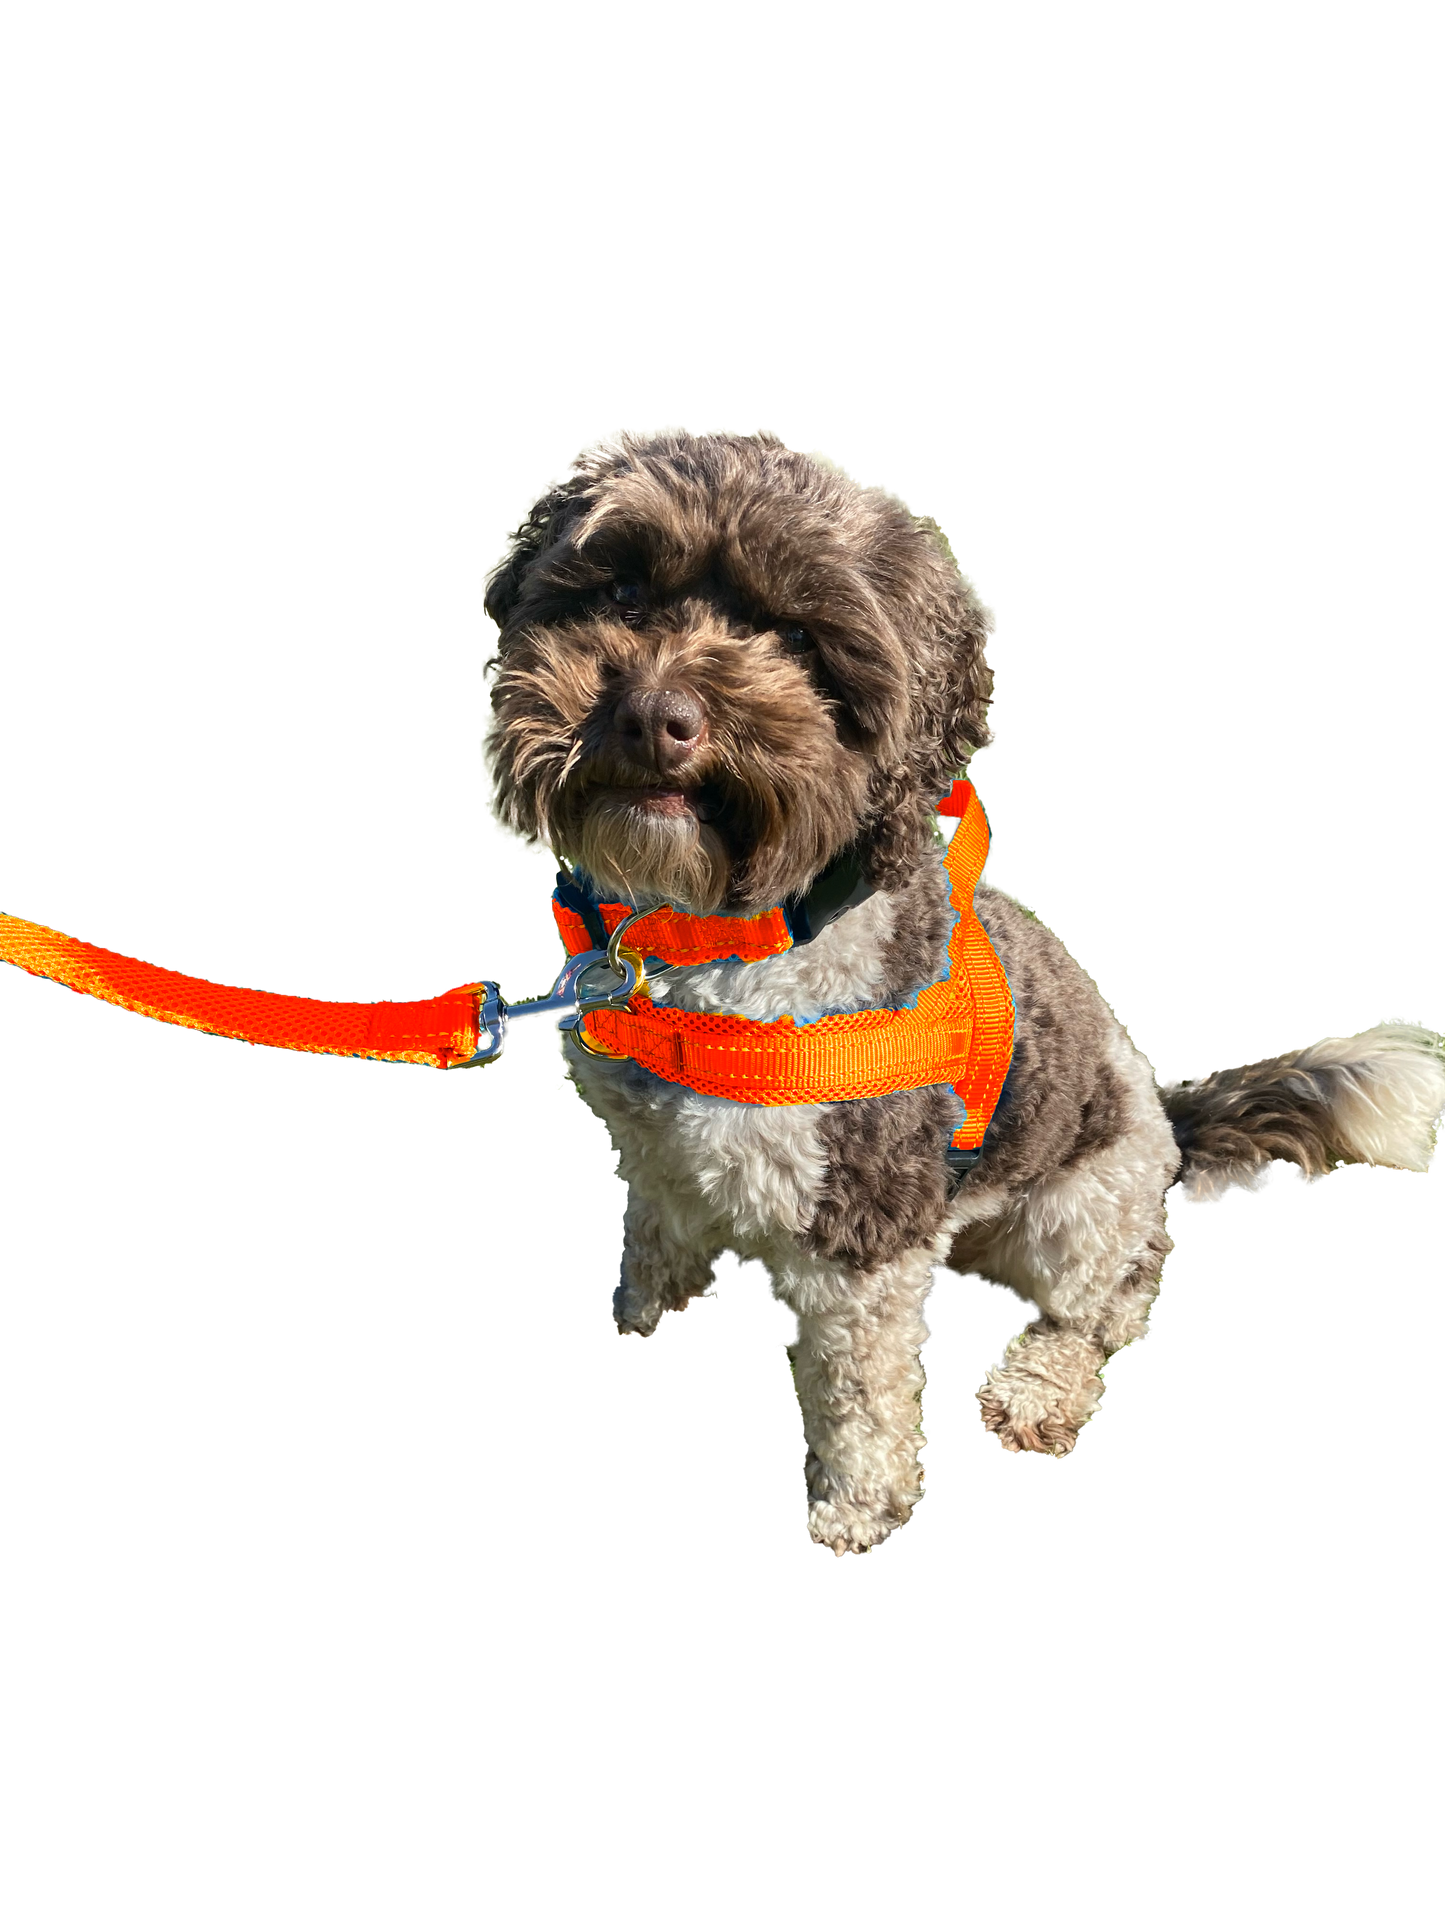 One clip dog harness